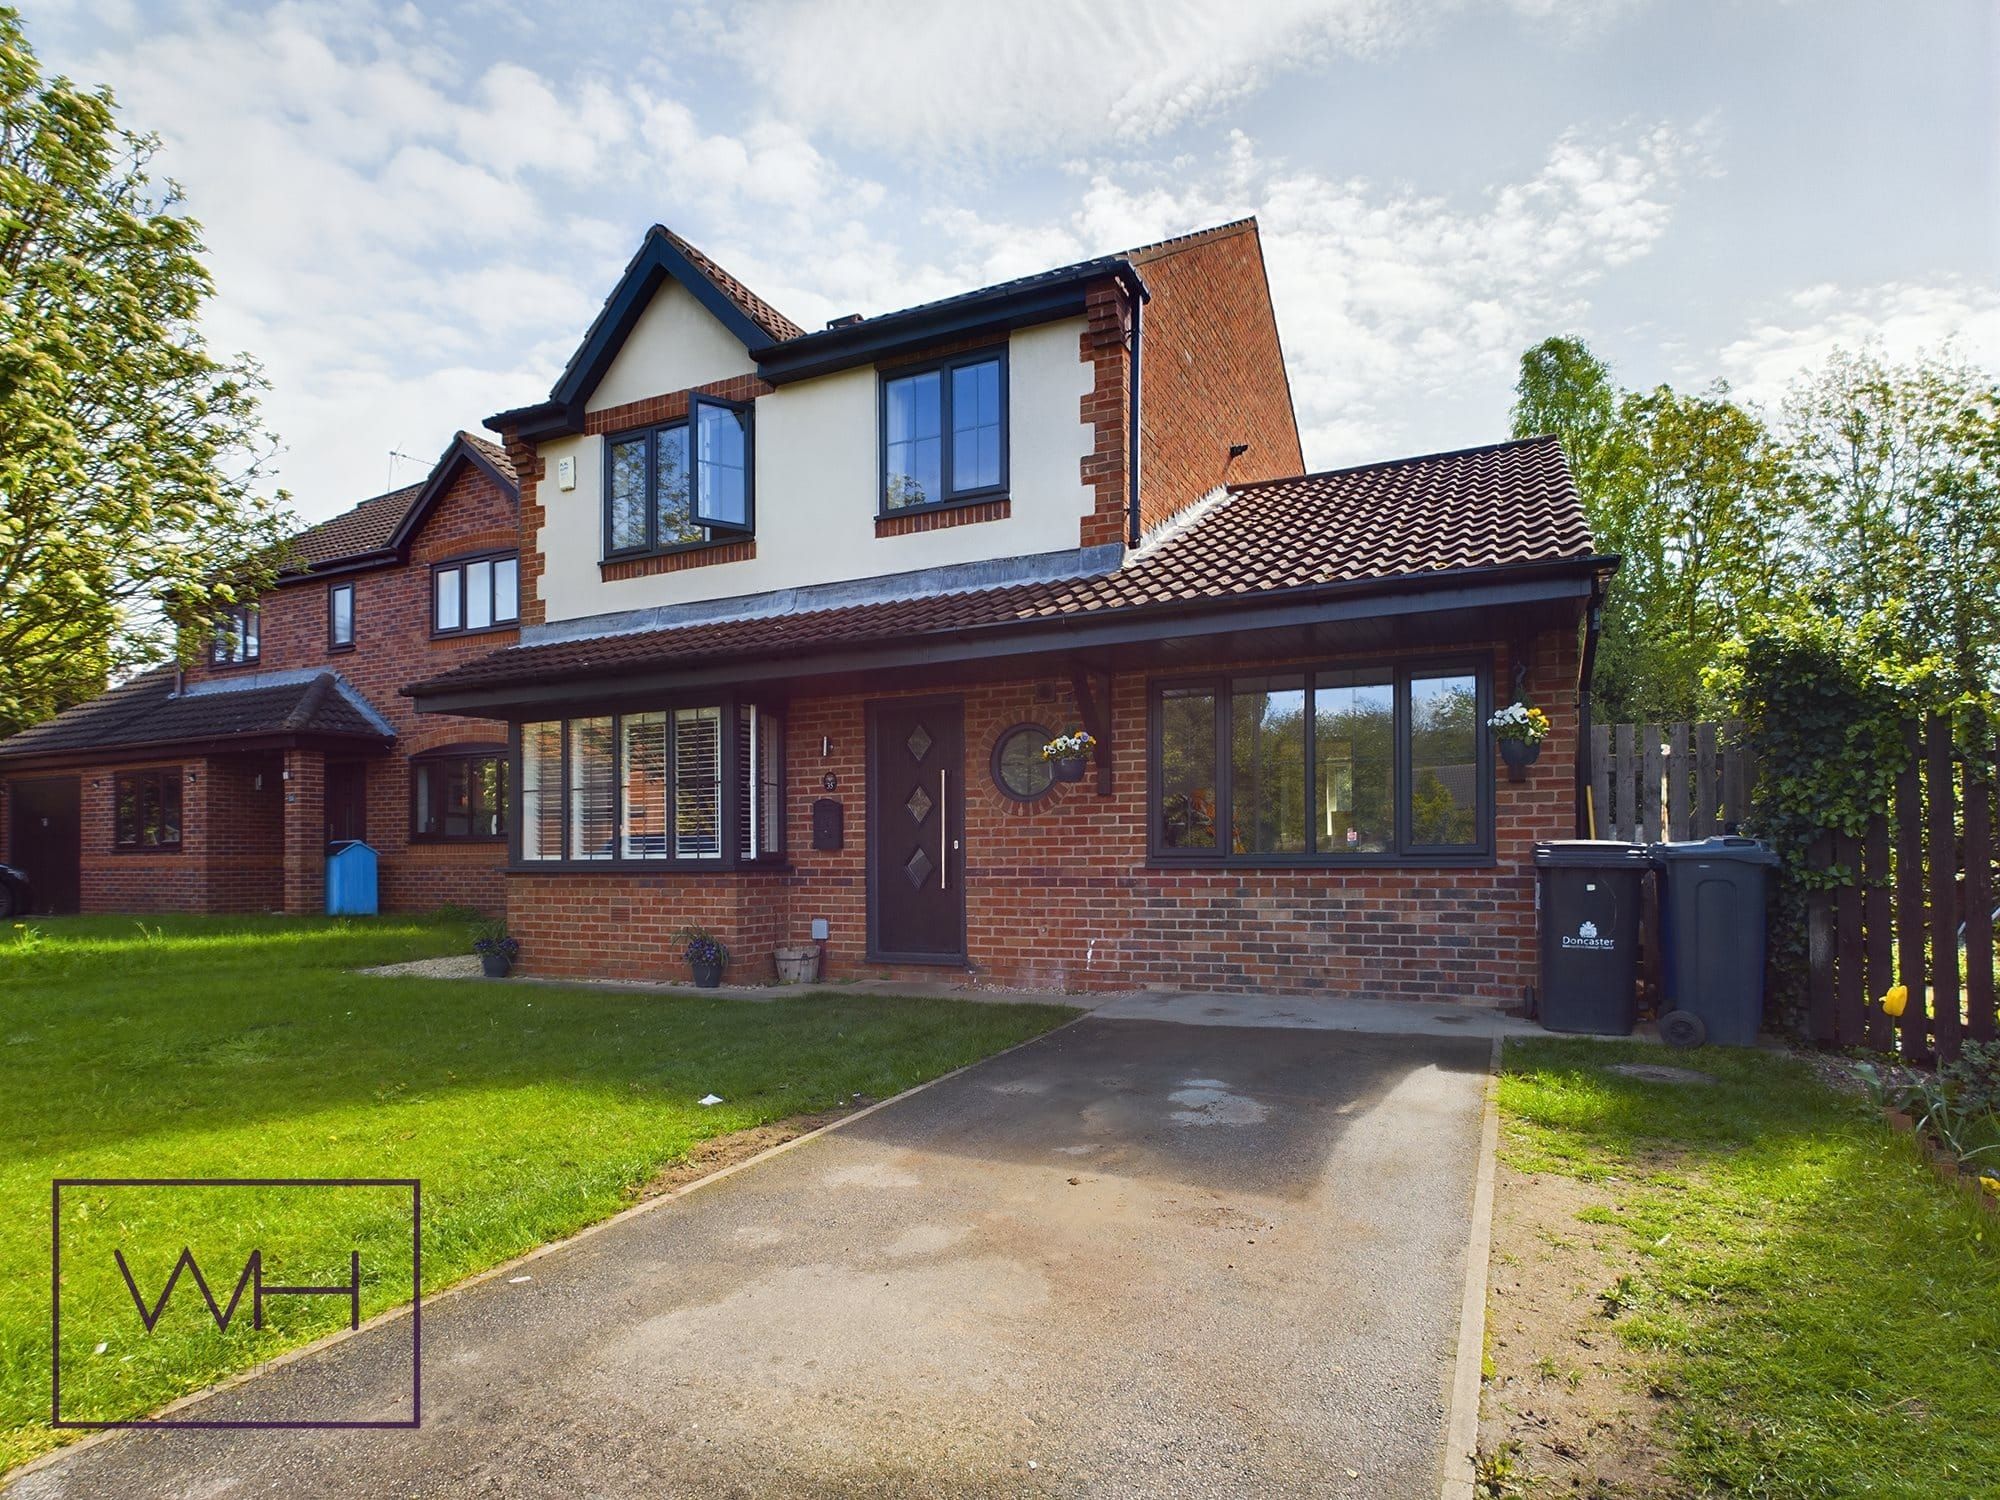 St Chads Way, Sprotbrough, Doncaster, DN5 7LF